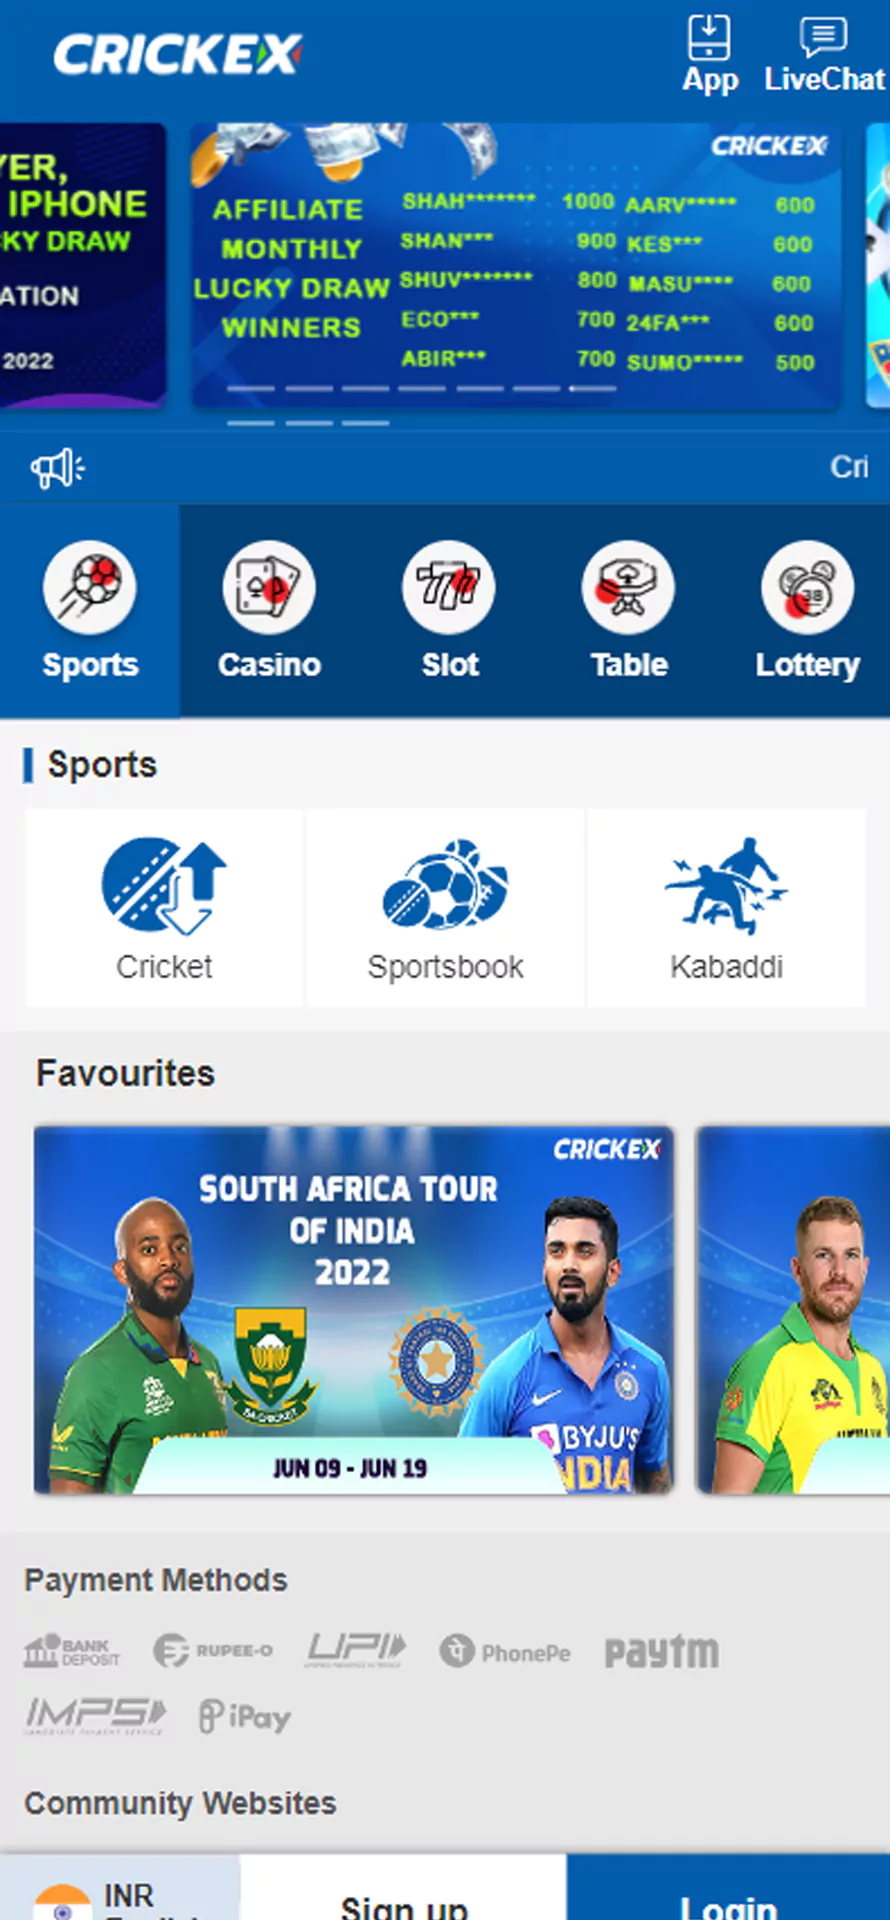 The sports betting section of the Crickex app.